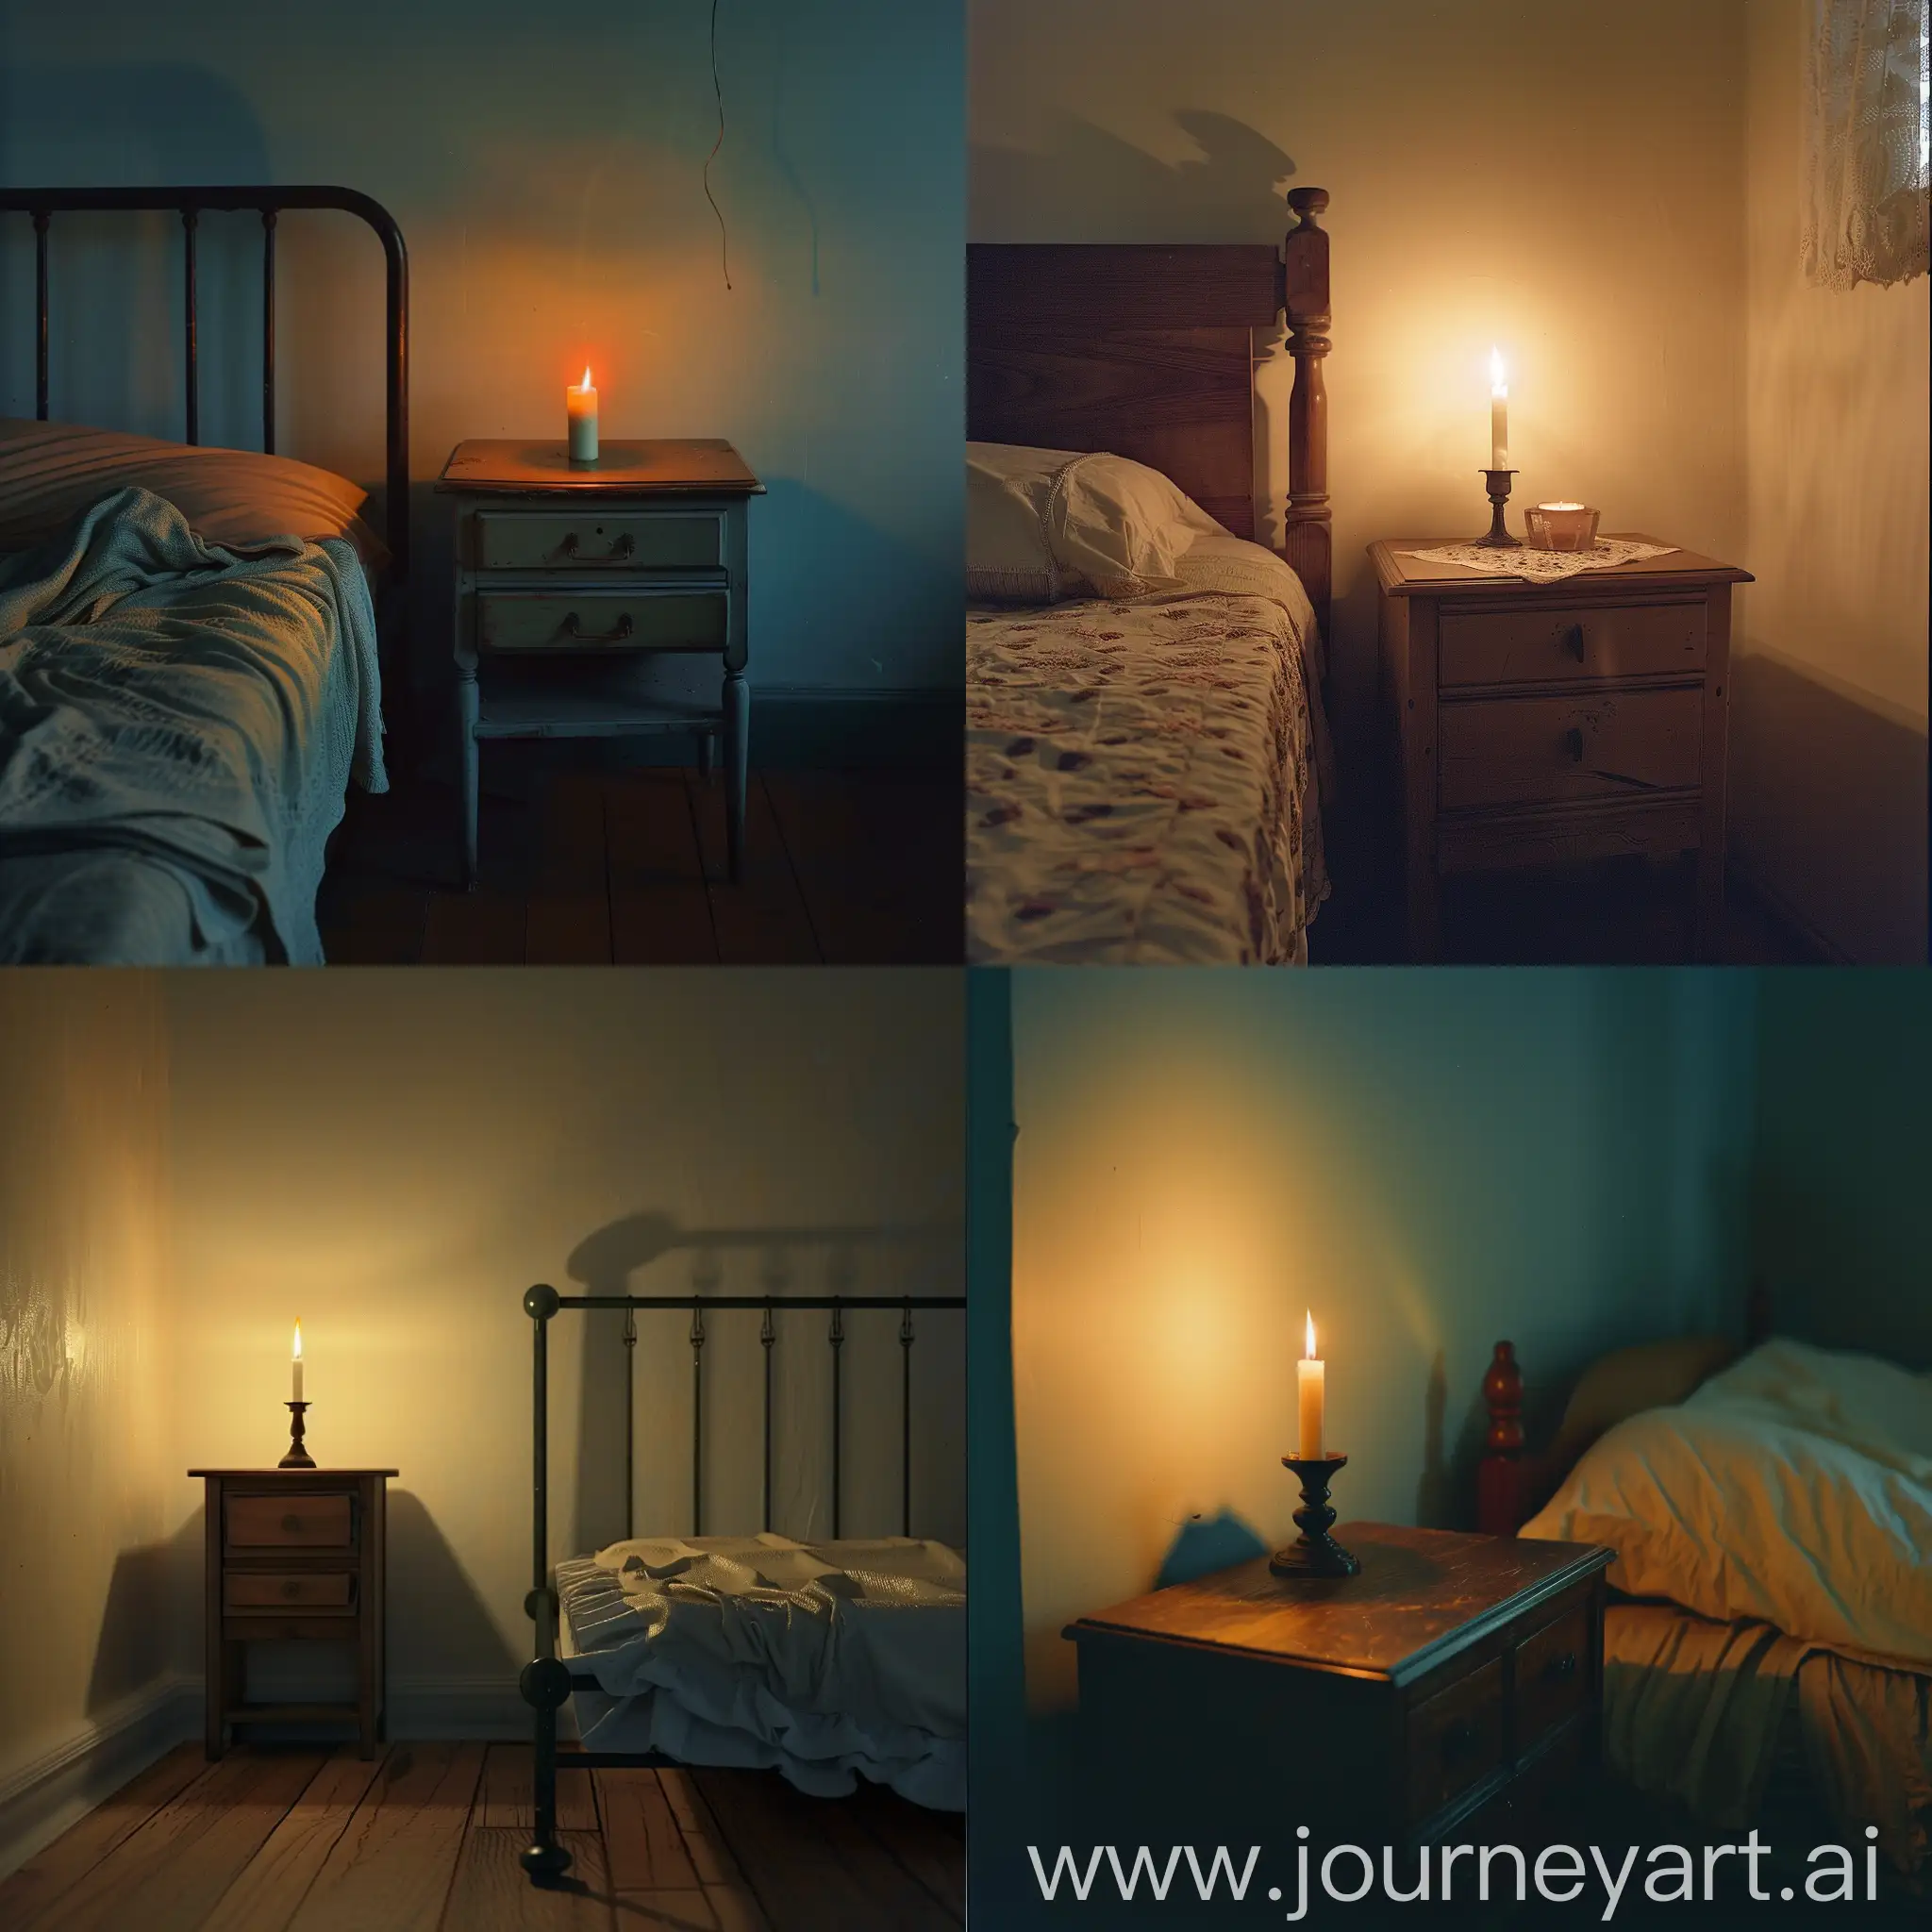 In a room illuminated by a burning candle on the nightstand, there is an empty bed next to the nightstand.